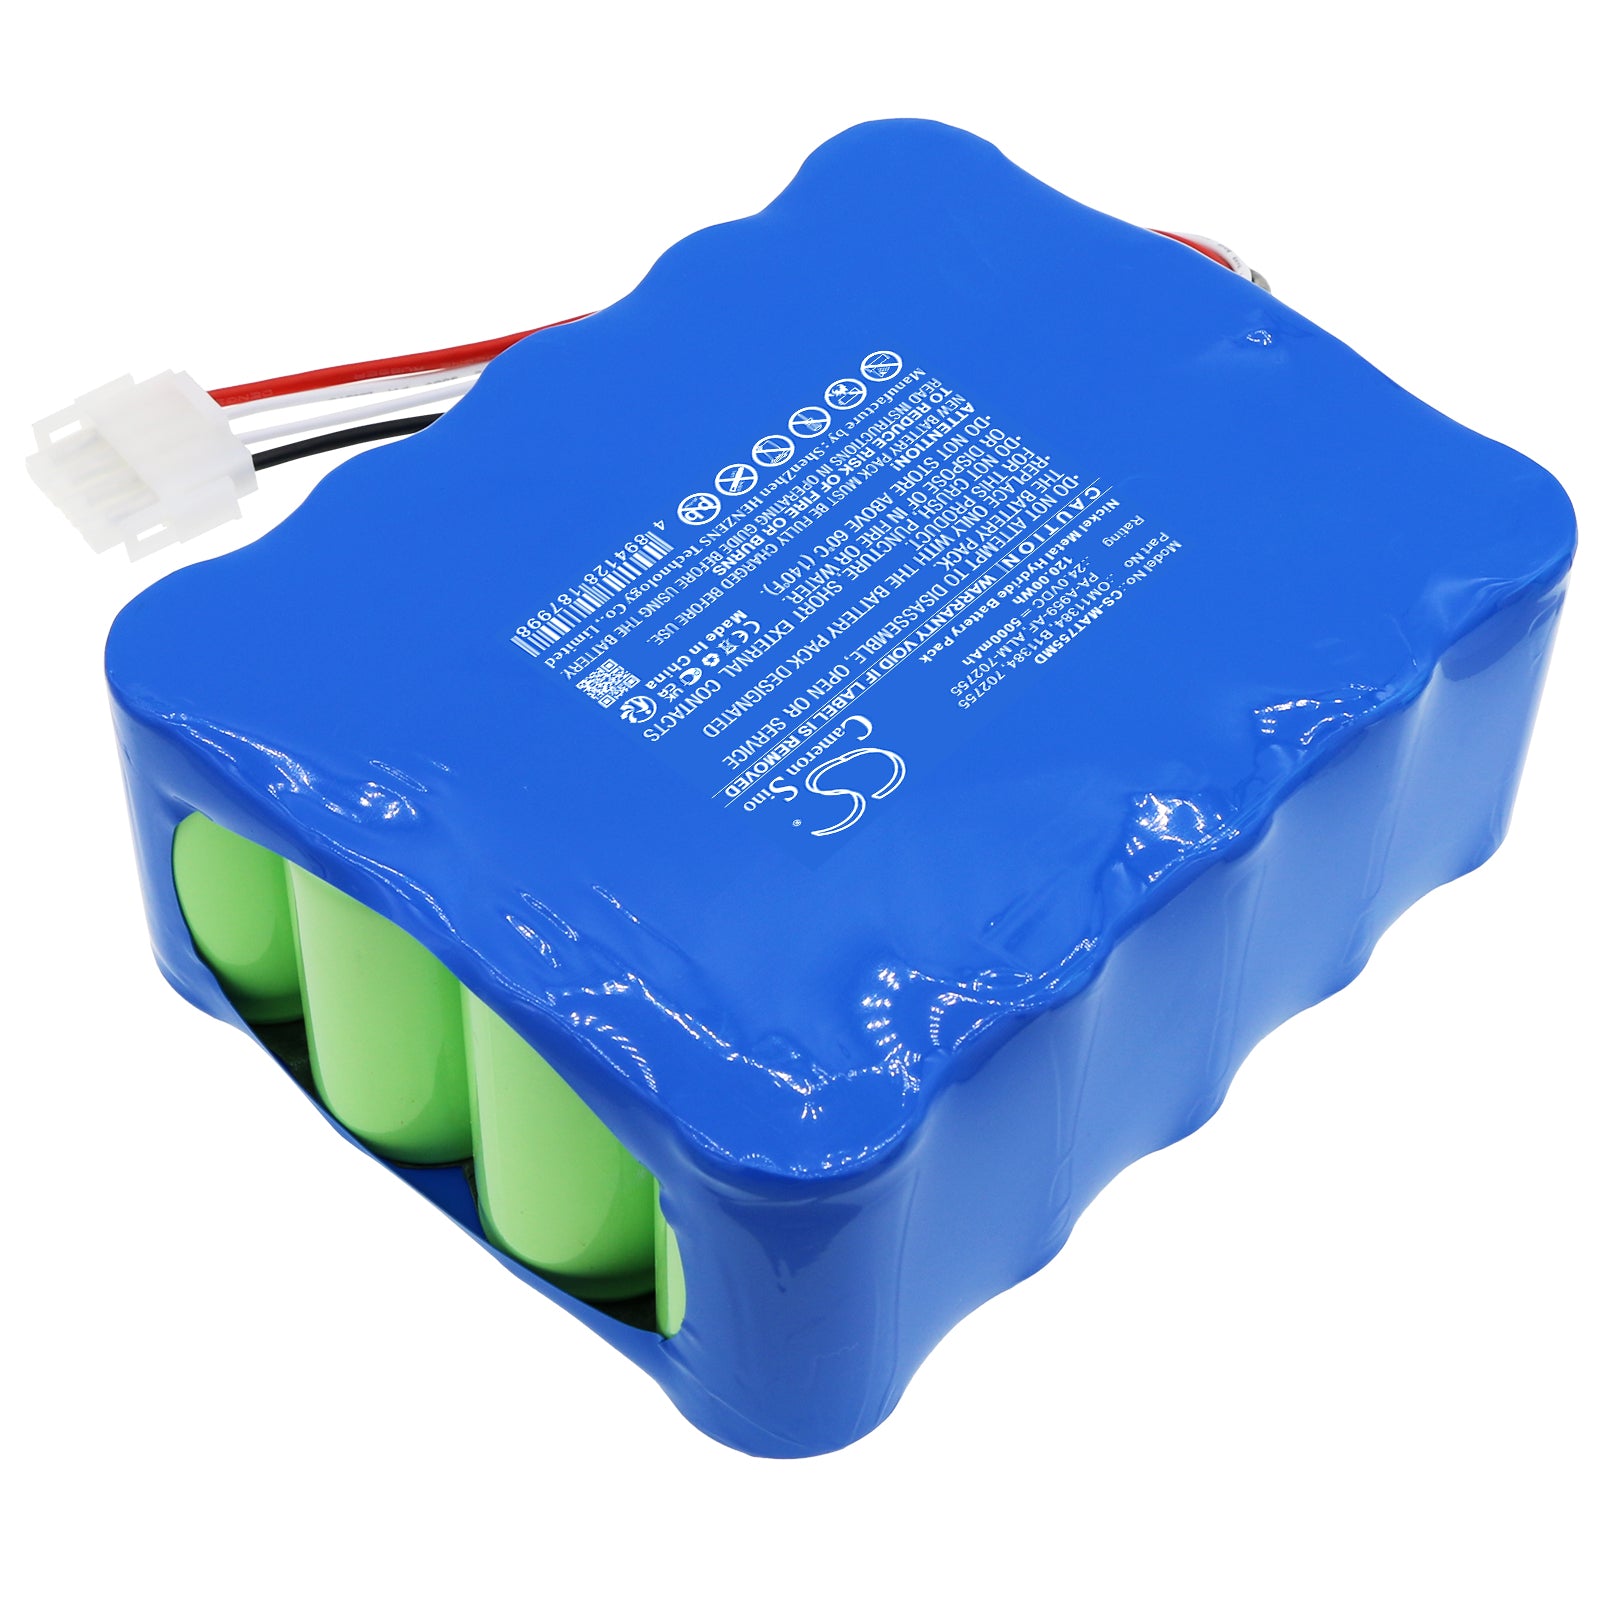 5000mAh OM11384, 702755, B11384, PA-A959-AF, ALM-702755 Battery for Maquet Table 702, Table 755, Jostra Rotaflow Centrifugal Pump System Console-SMAVtronics